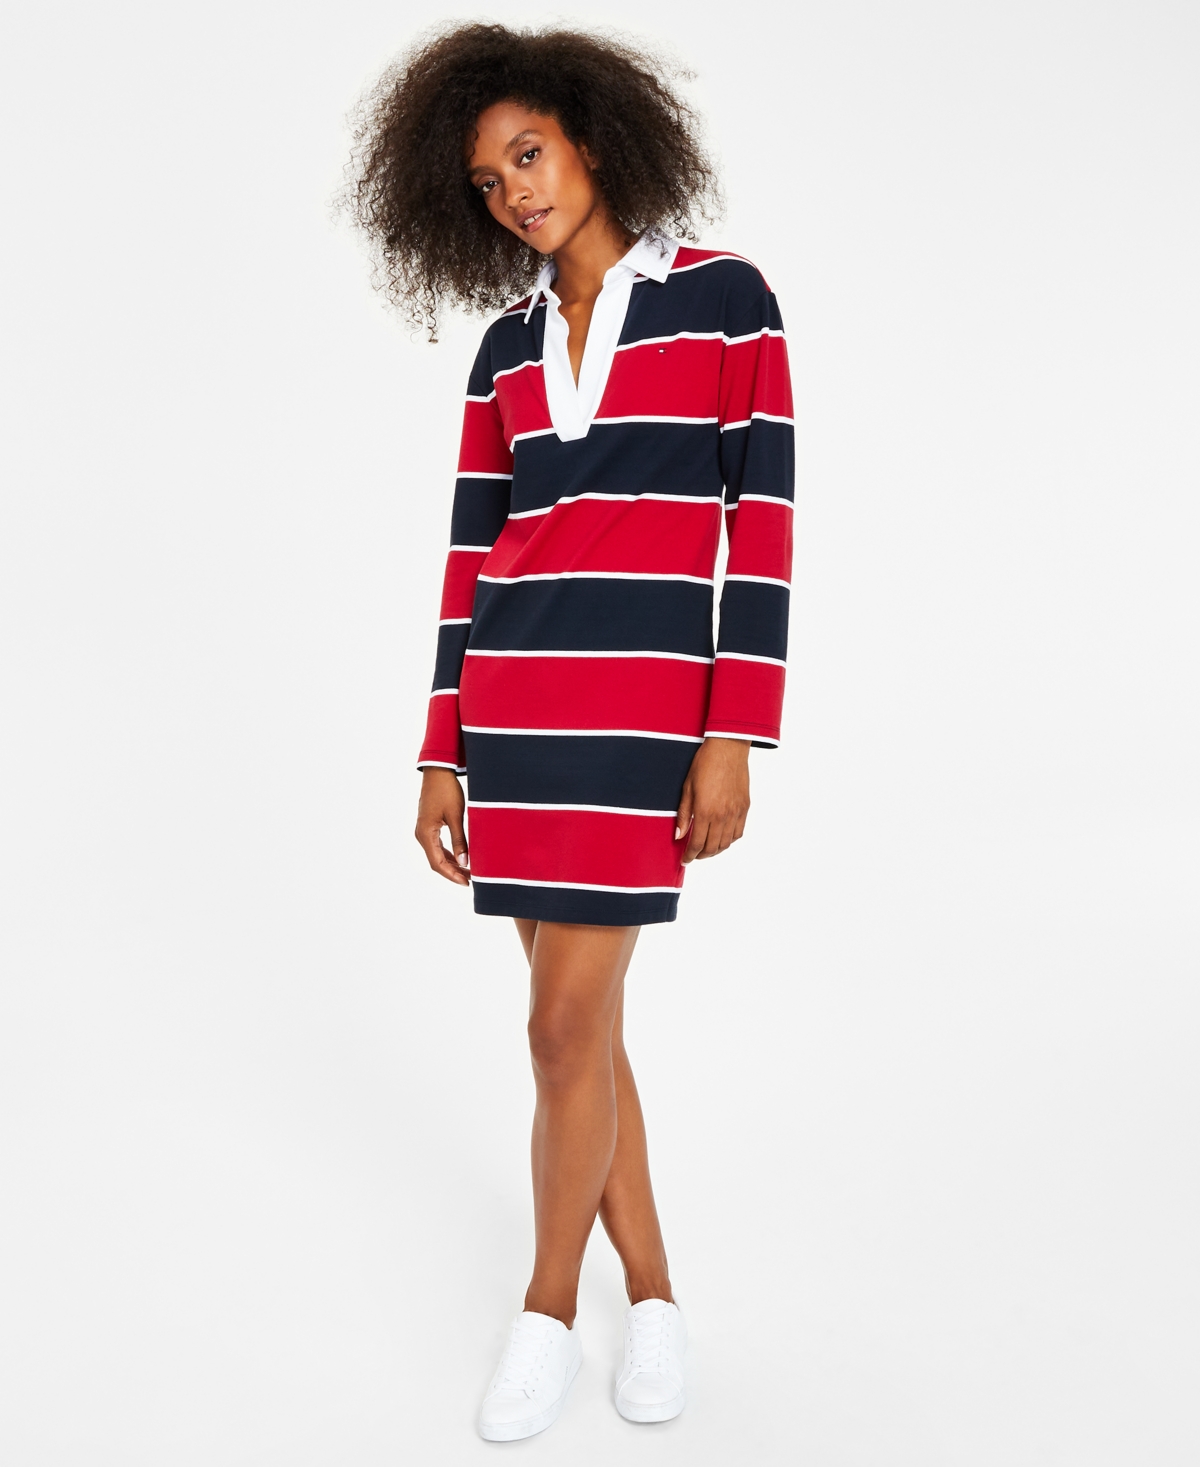 Tommy Hilfiger Women's Rugby Collared Dress